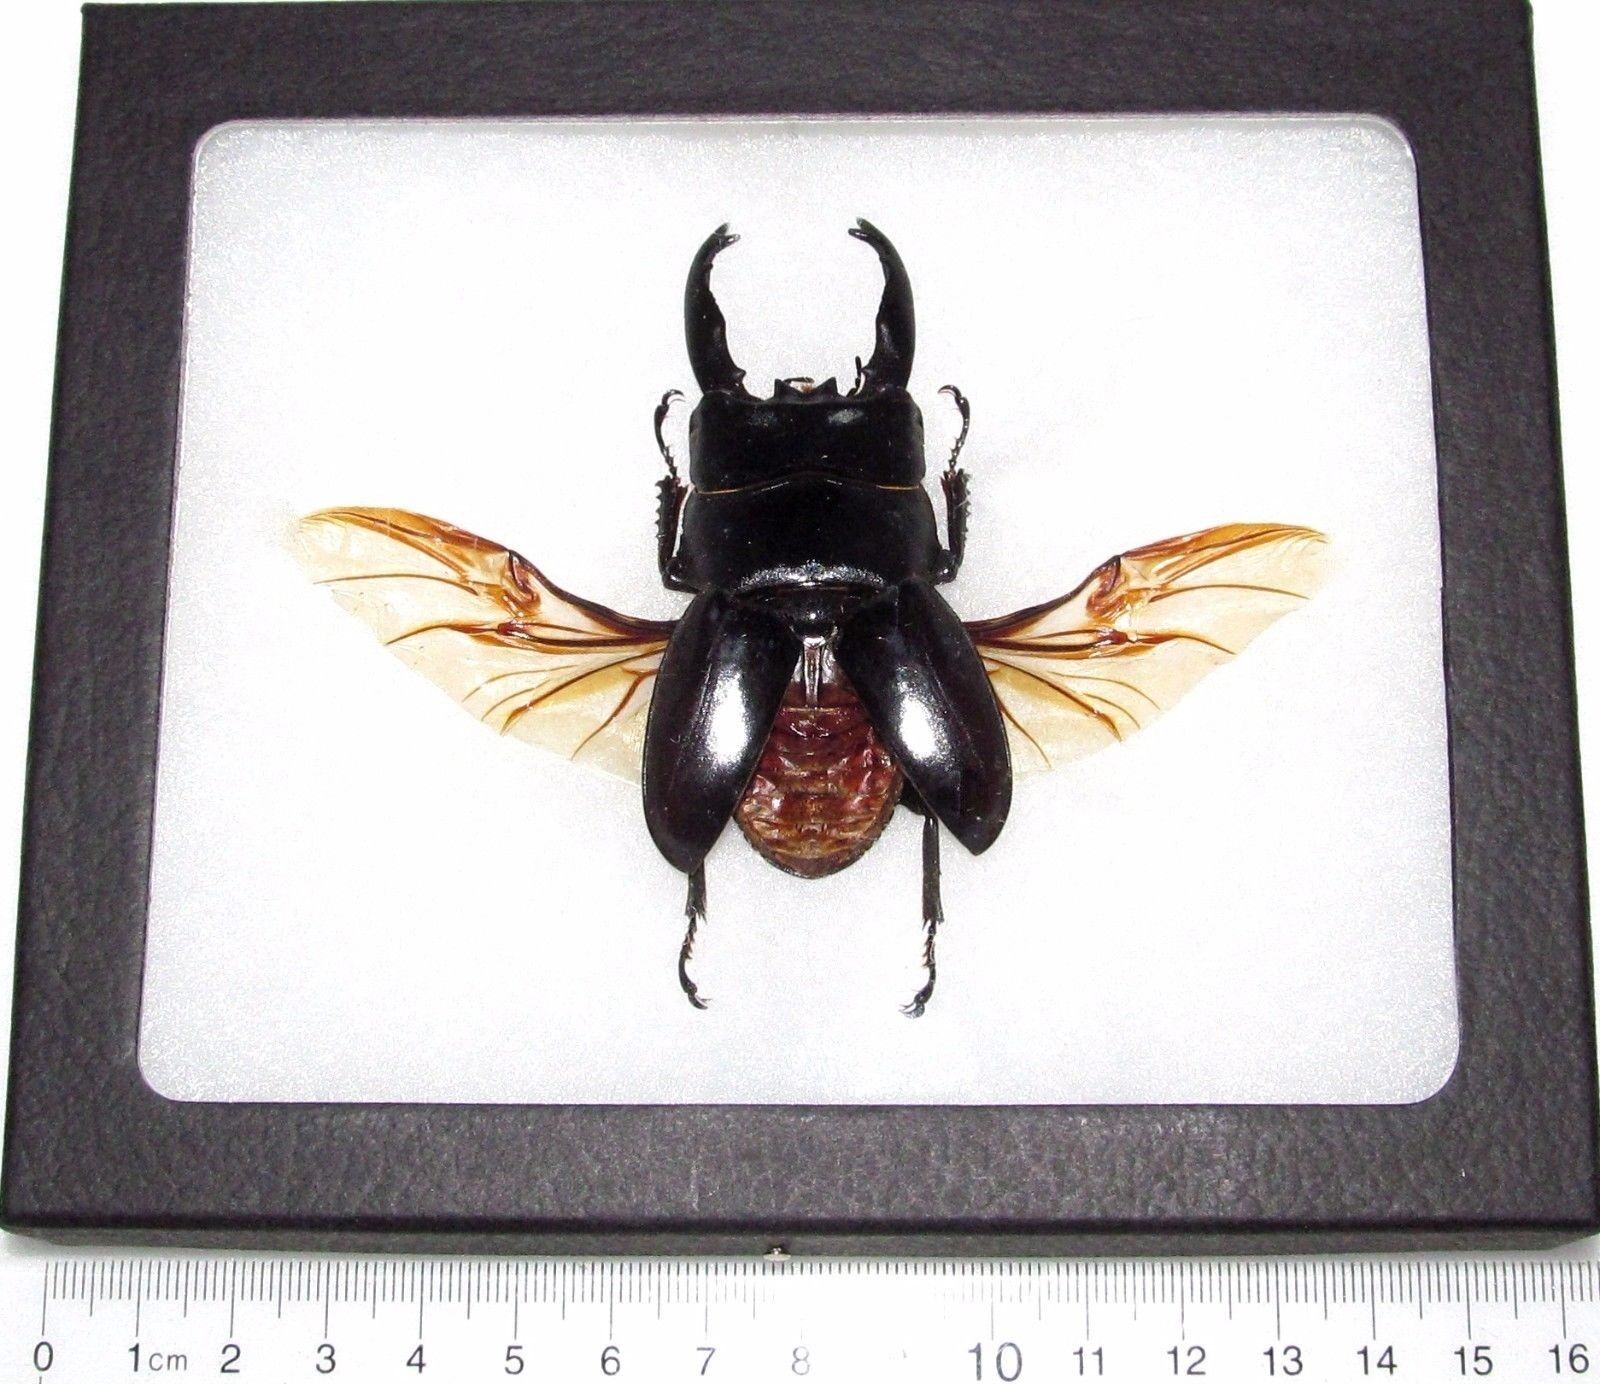 Dorcus wings spread REAL FRAMED BLACK LARGE STAG BEETLE MOUNTED